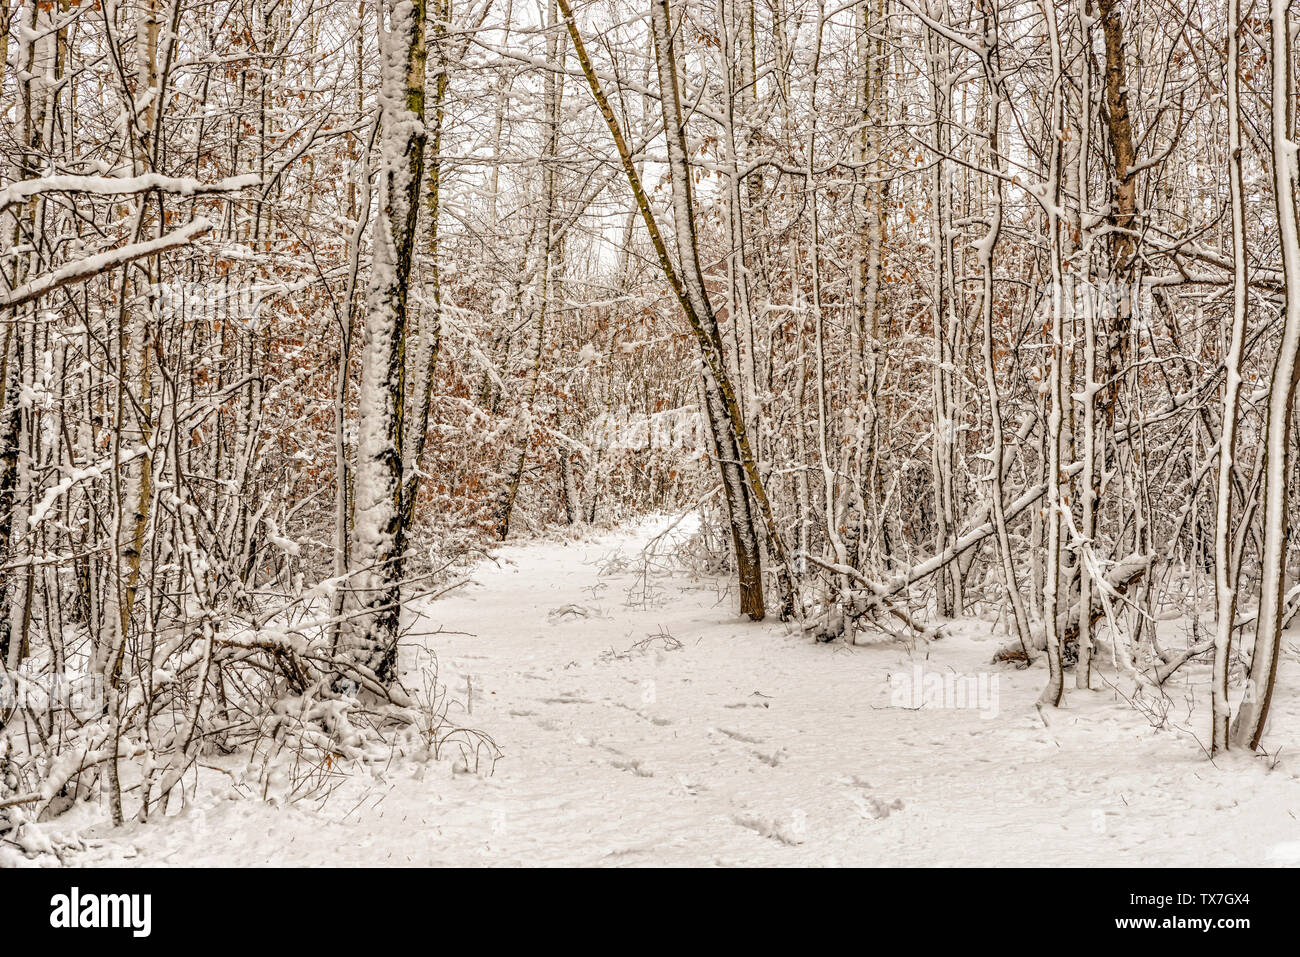 Beautiful winter landscape in the snowy forest, a trip to the south Poland in January. Stock Photo